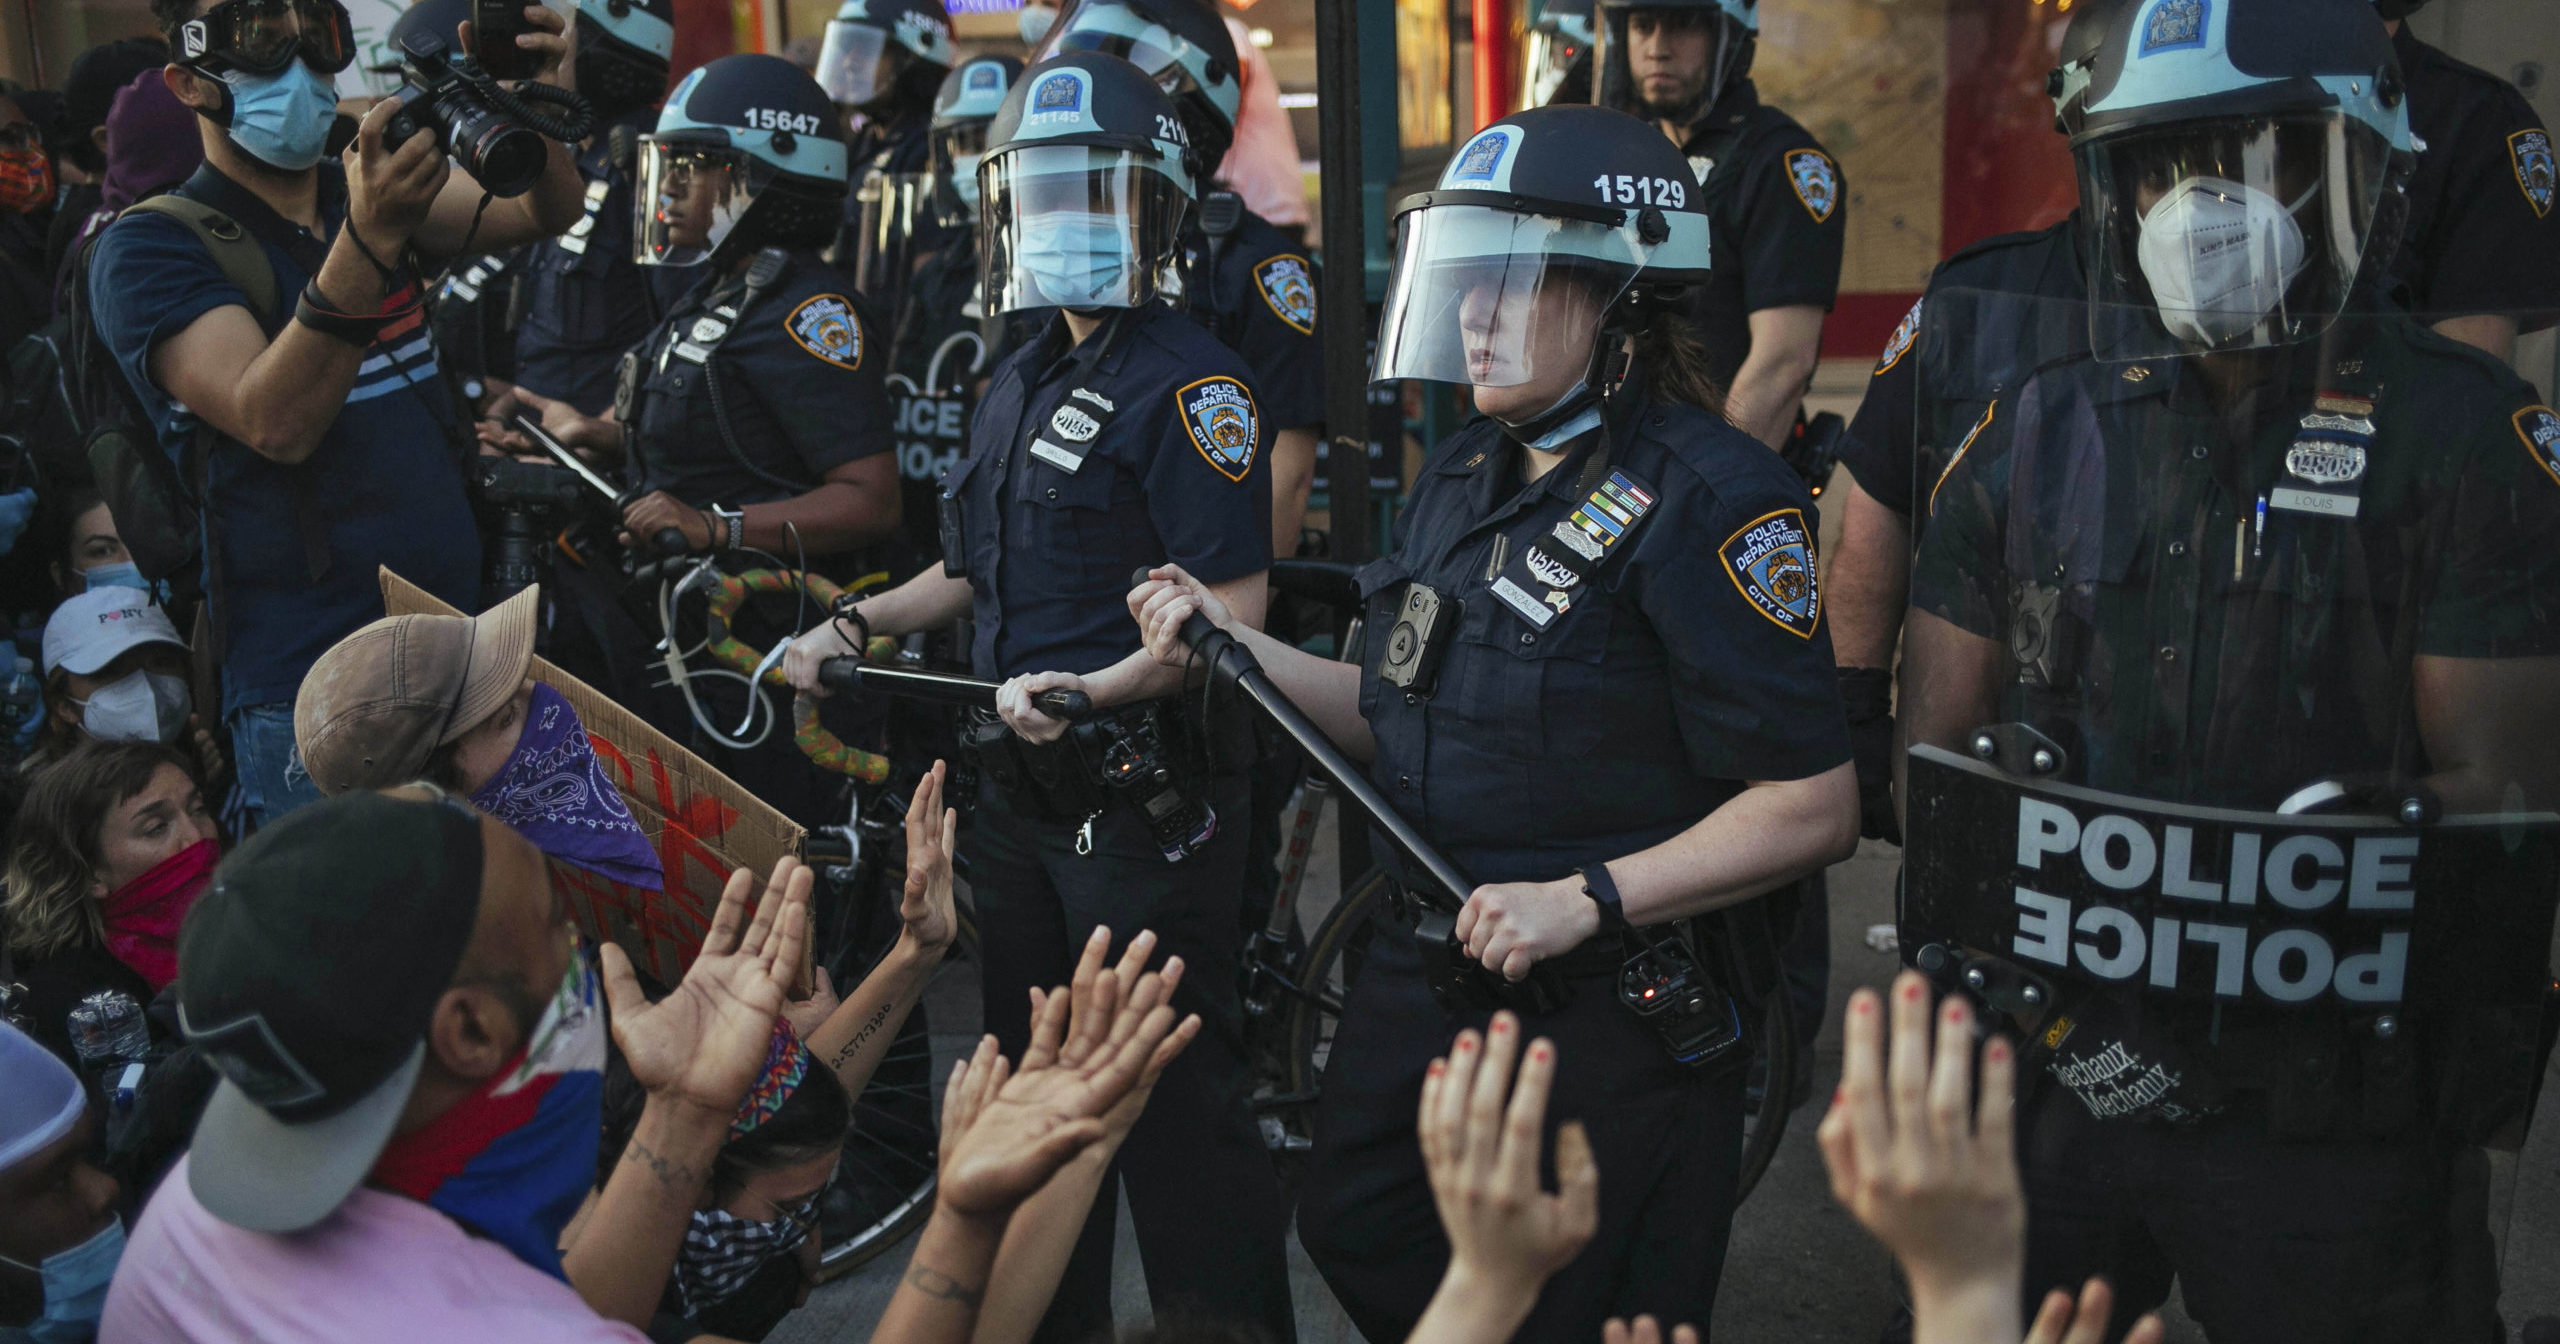 New York City police face off with activists during a protest in the Brooklyn borough of New York on May 31, 2020.